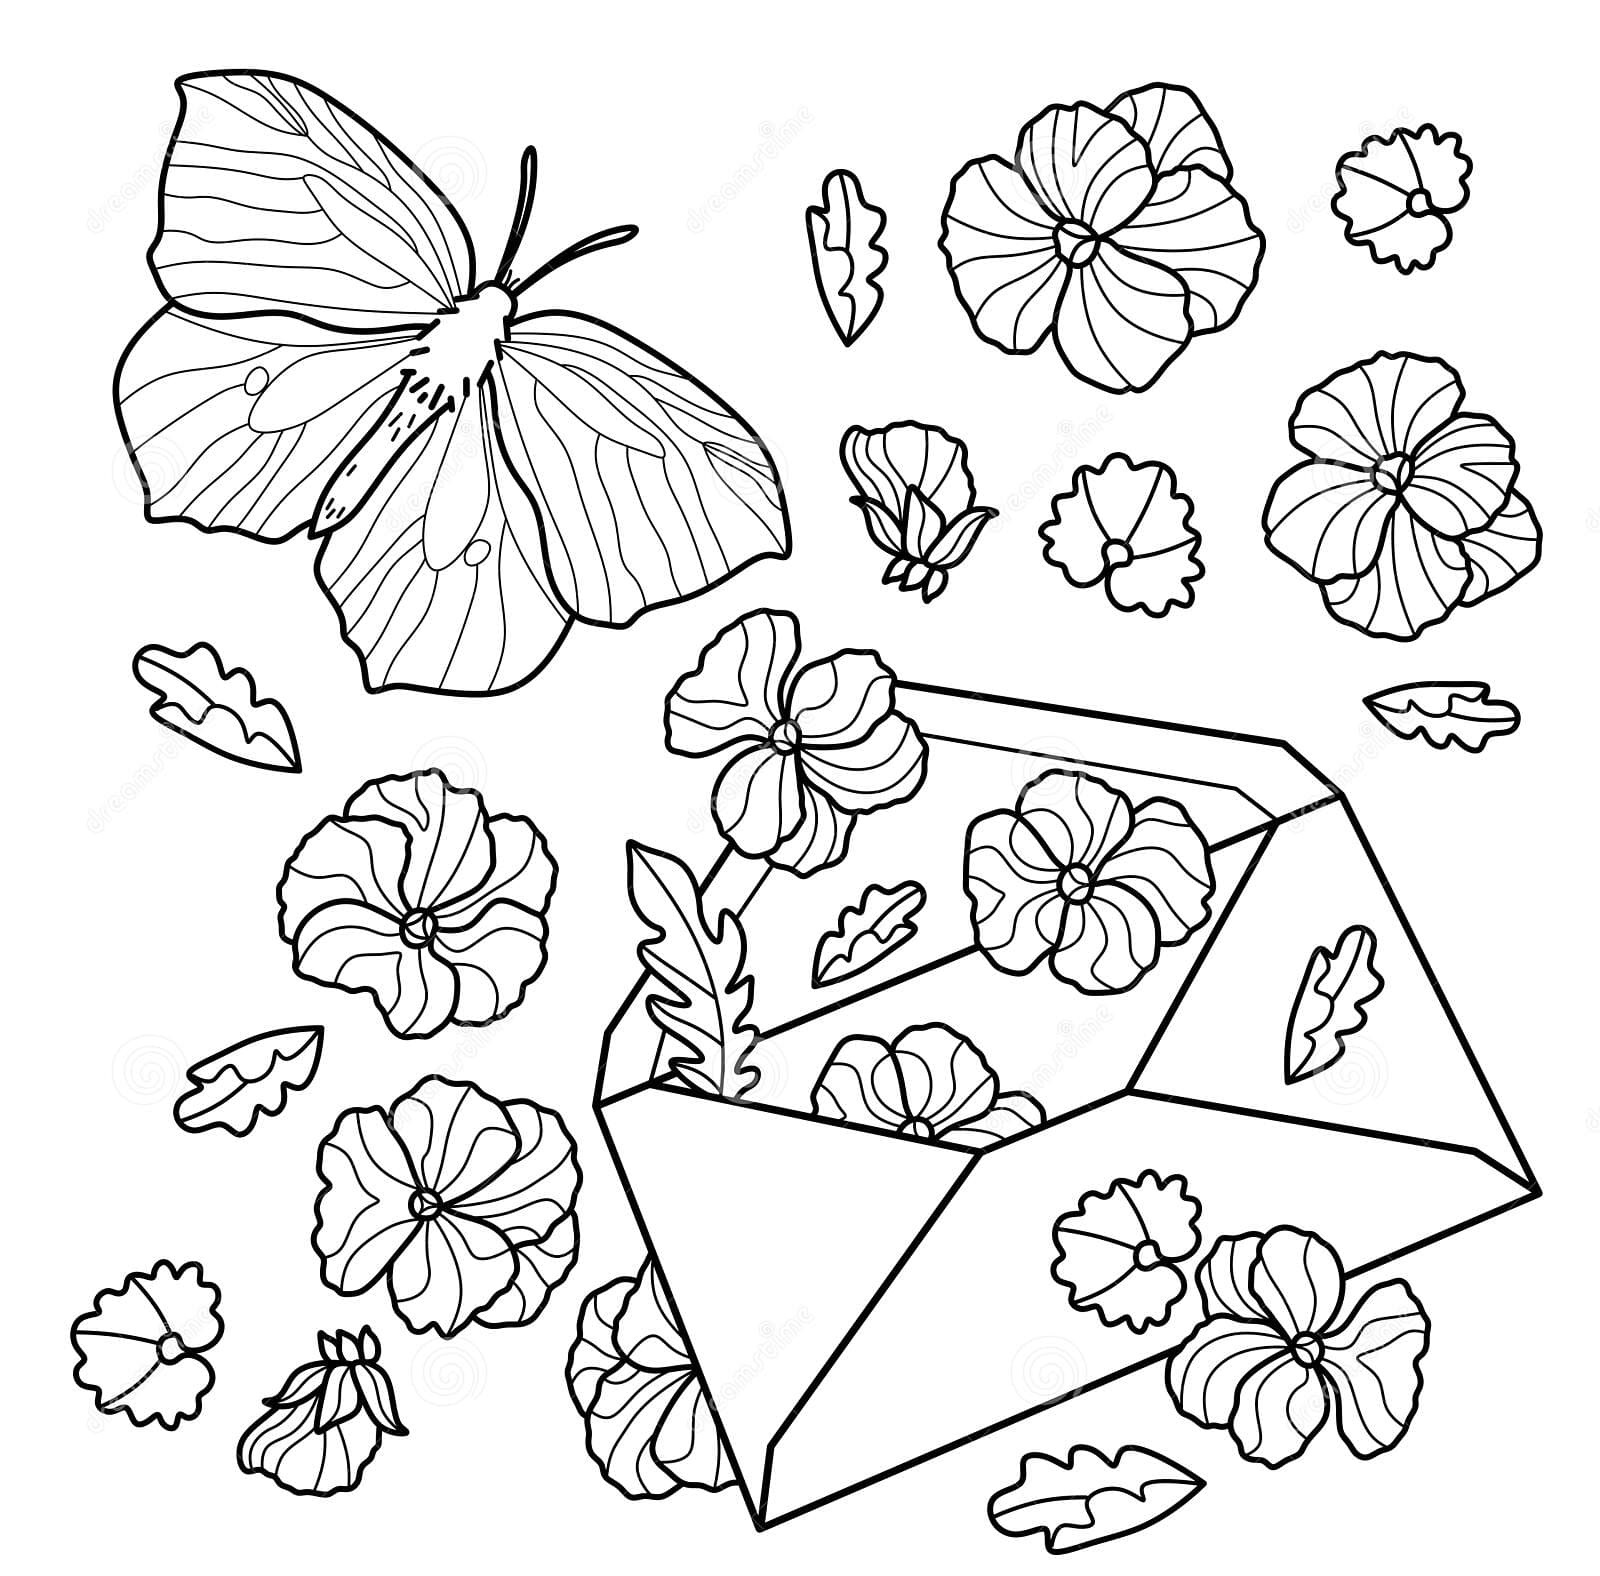 Envelope with pansies Coloring Page